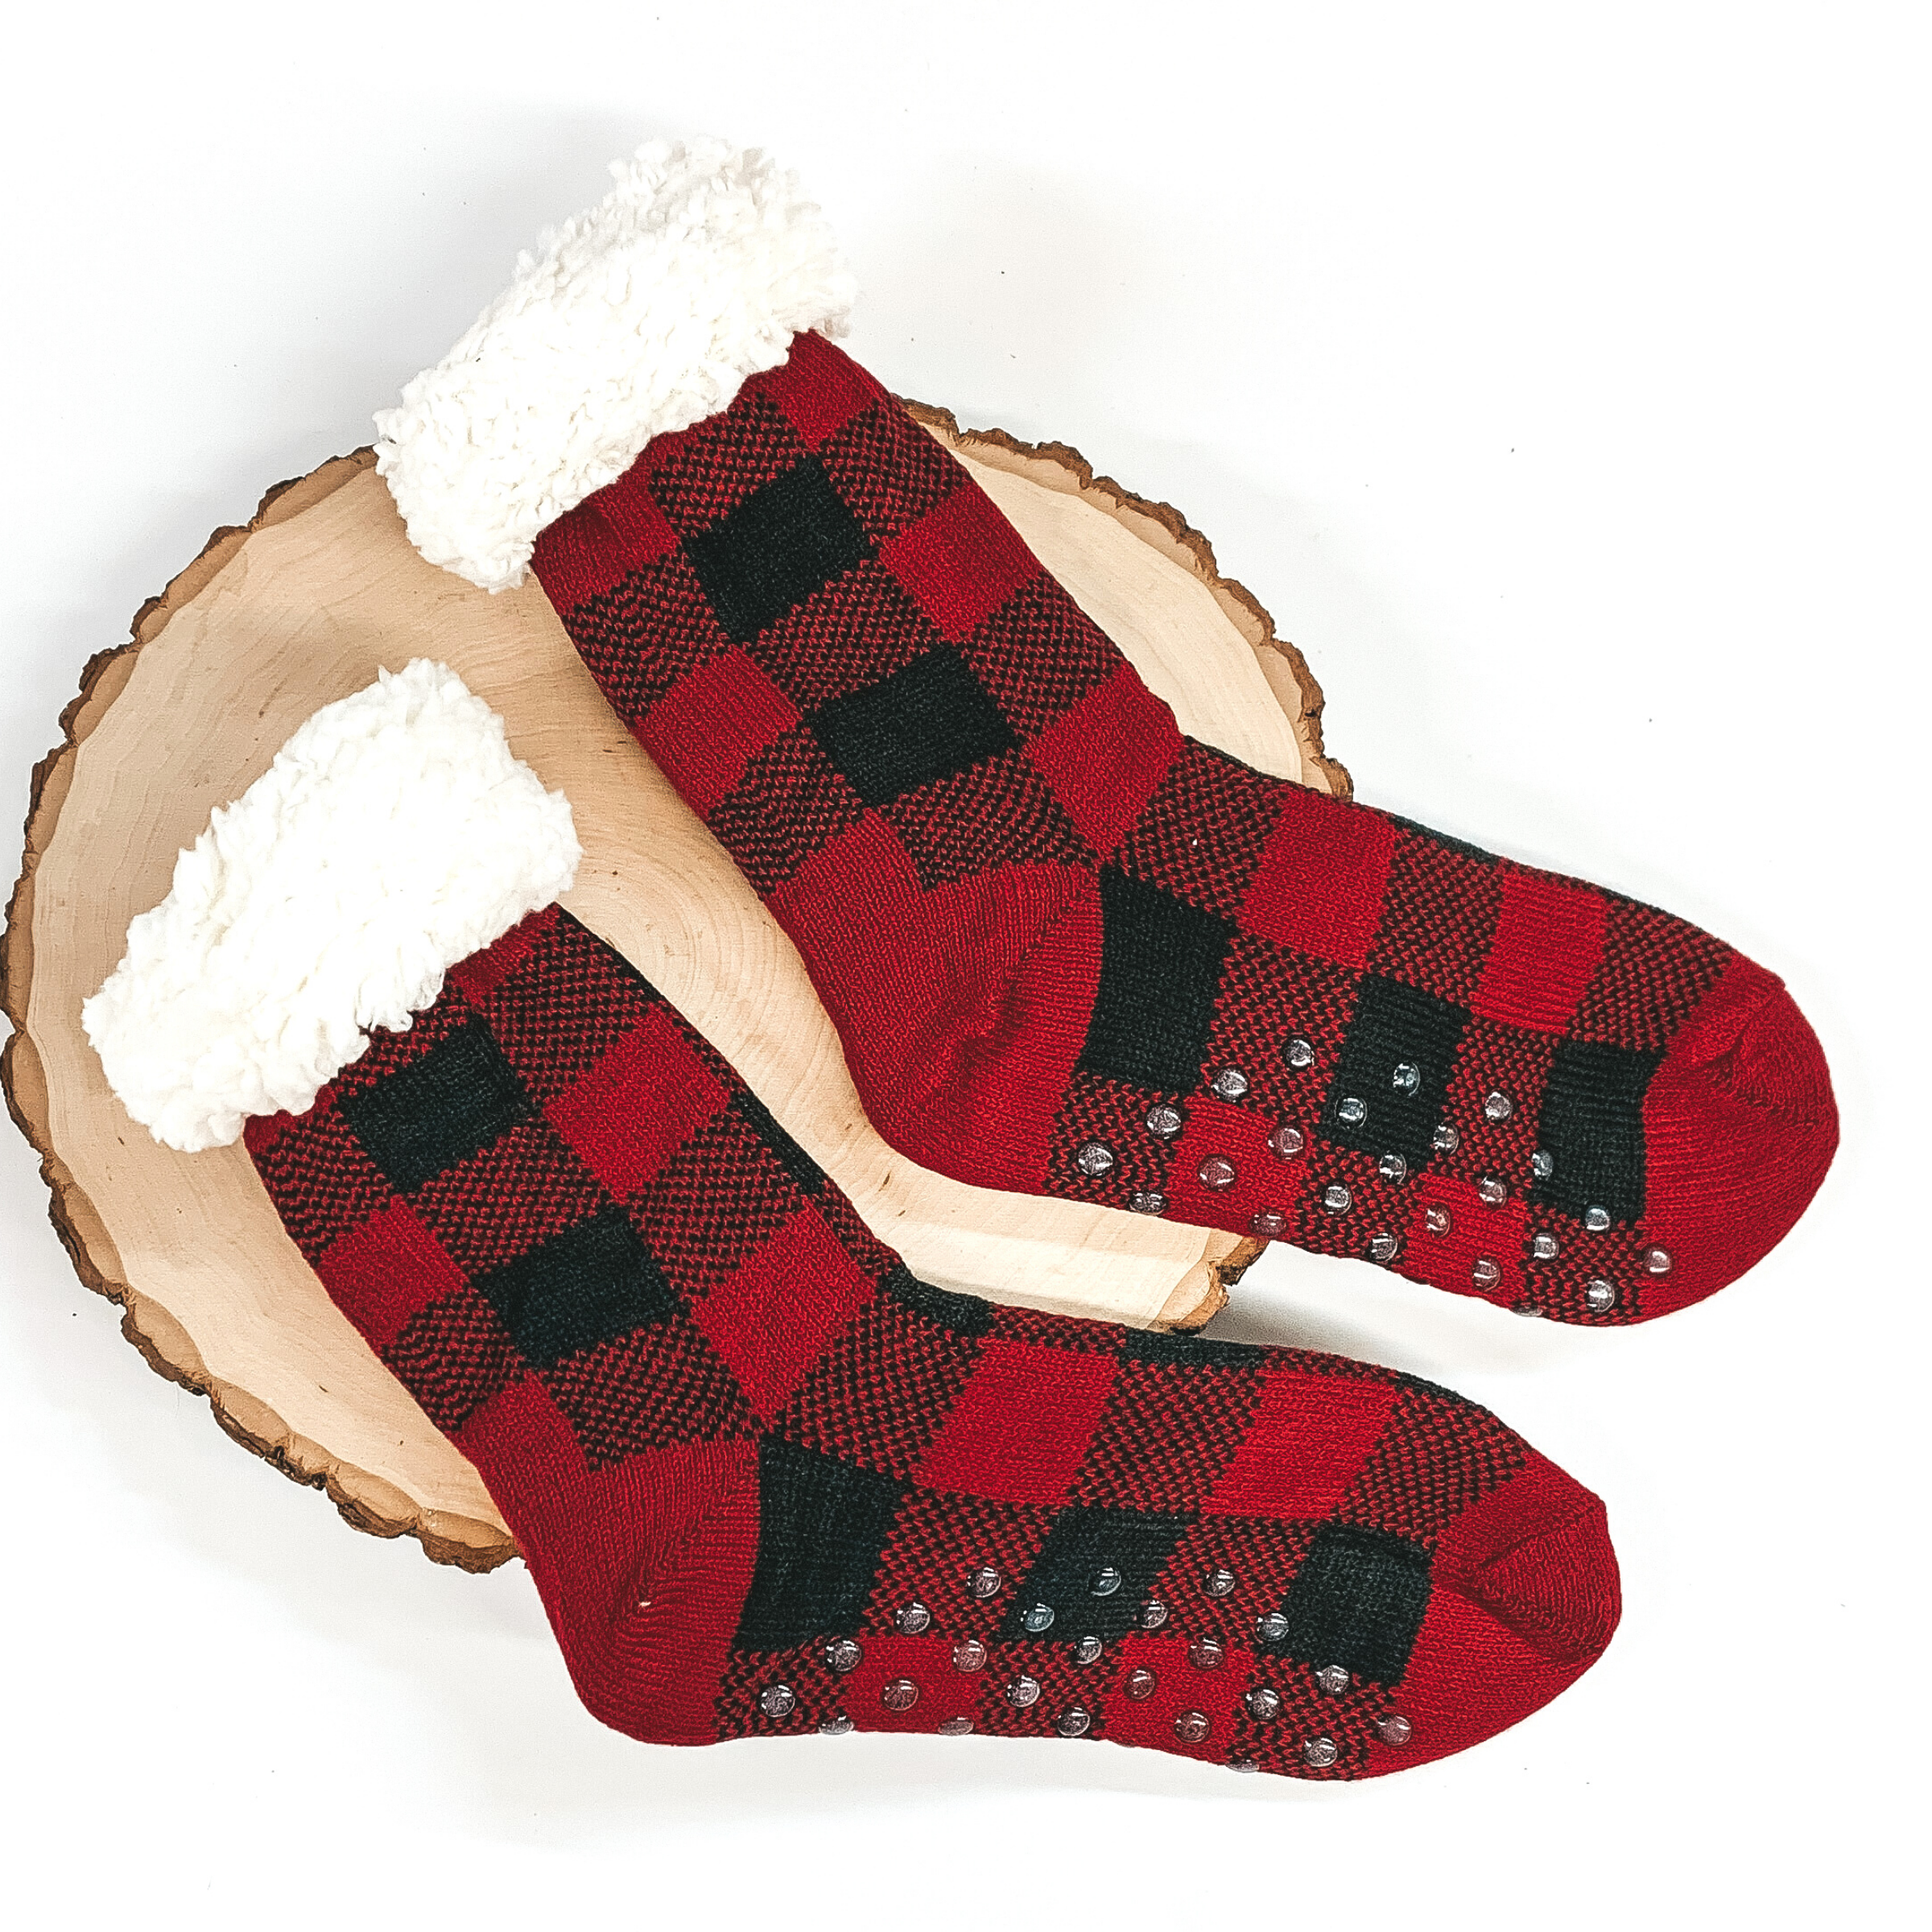 Red buffalo plaid socks that has rubber grips on the bottom and white fluff on the top of the socks. these socks are pictured laying on a piece of wood on a white background. 